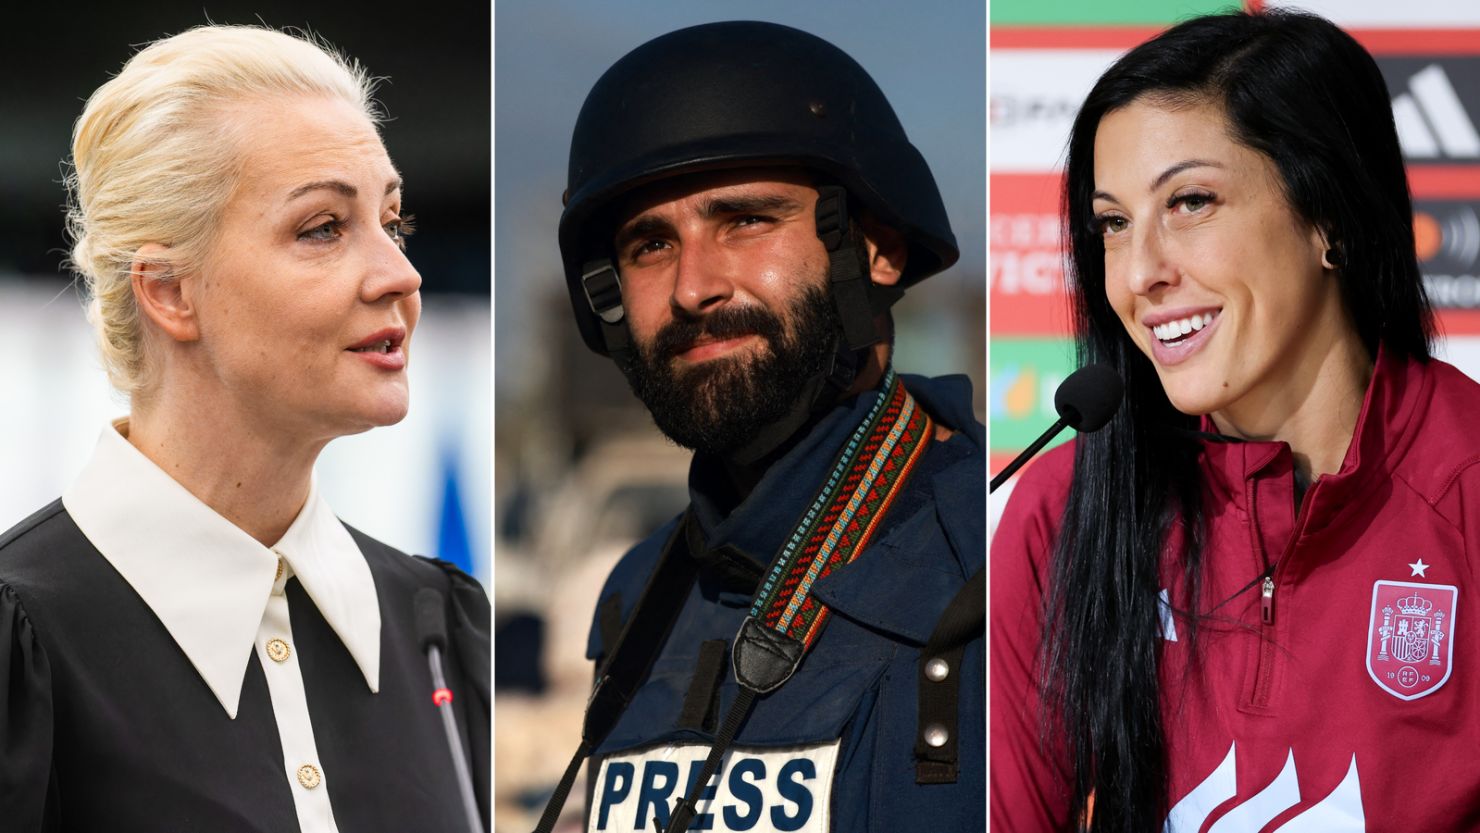 Yulia Navalnaya, Motaz Azaiza and Jenni Hermoso are just some of the icons highlighted in this year's TIME list.